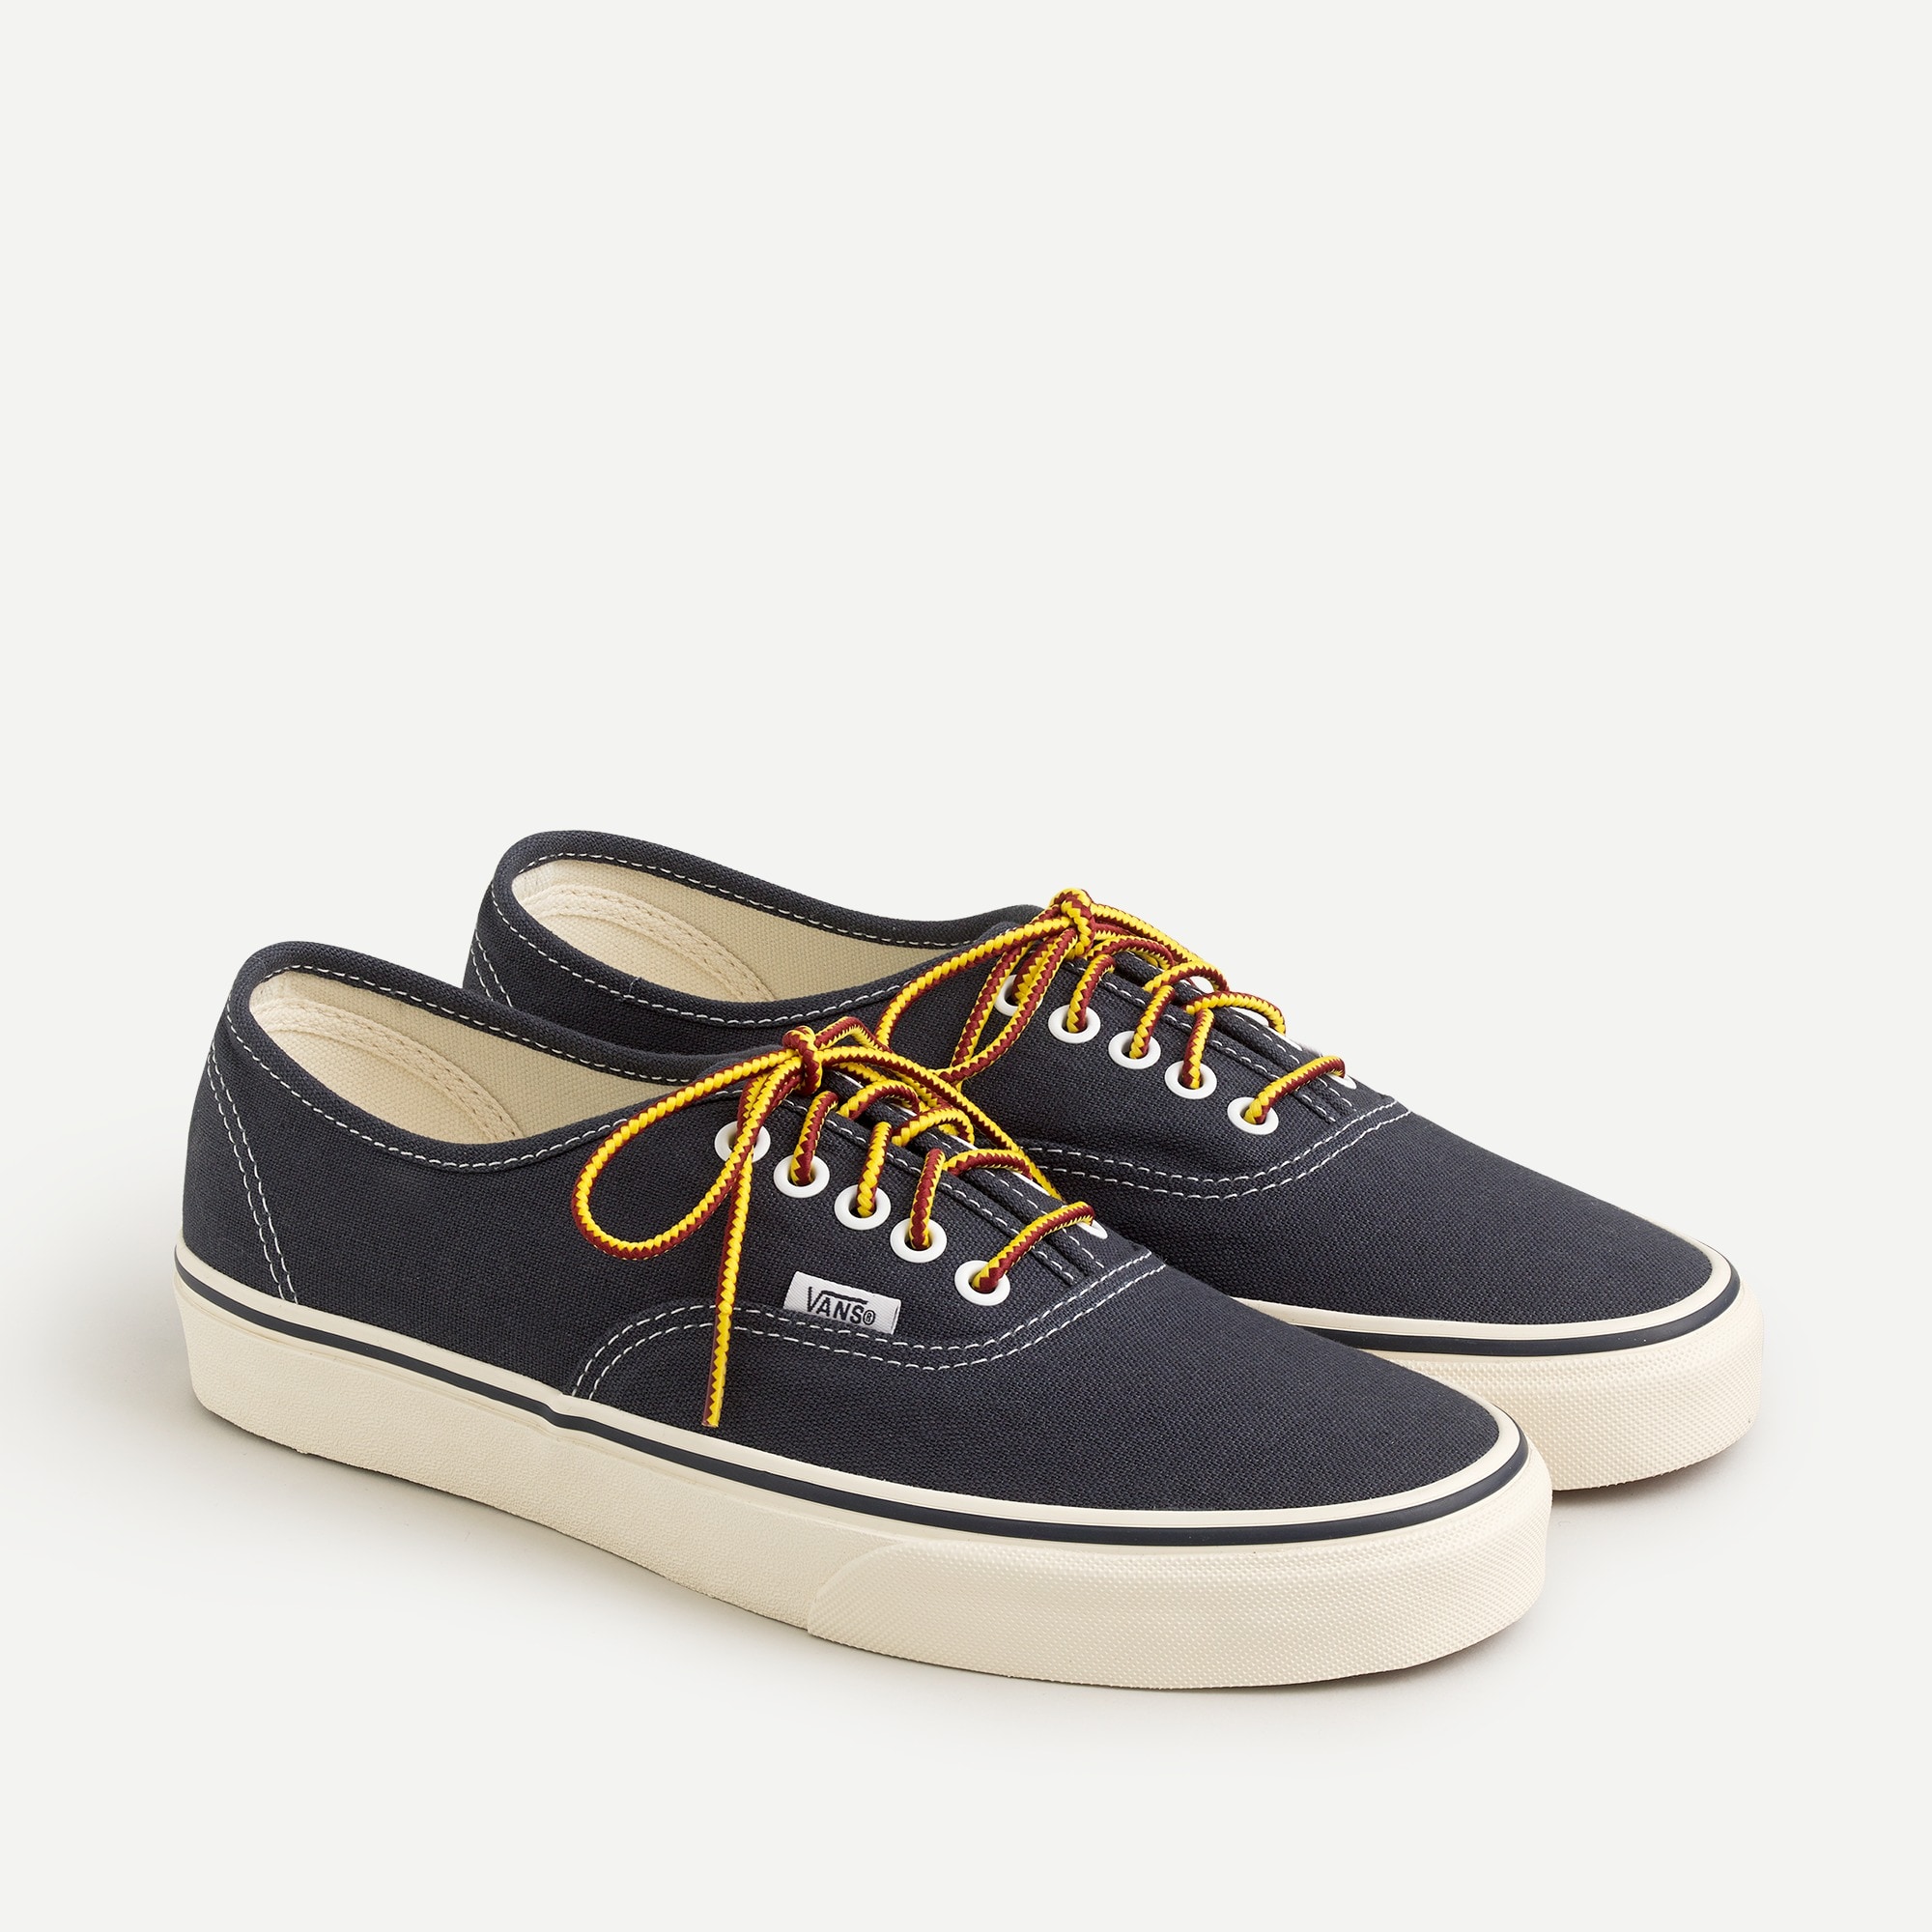 J.Crew Washed Canvas Authentic Sneakers 